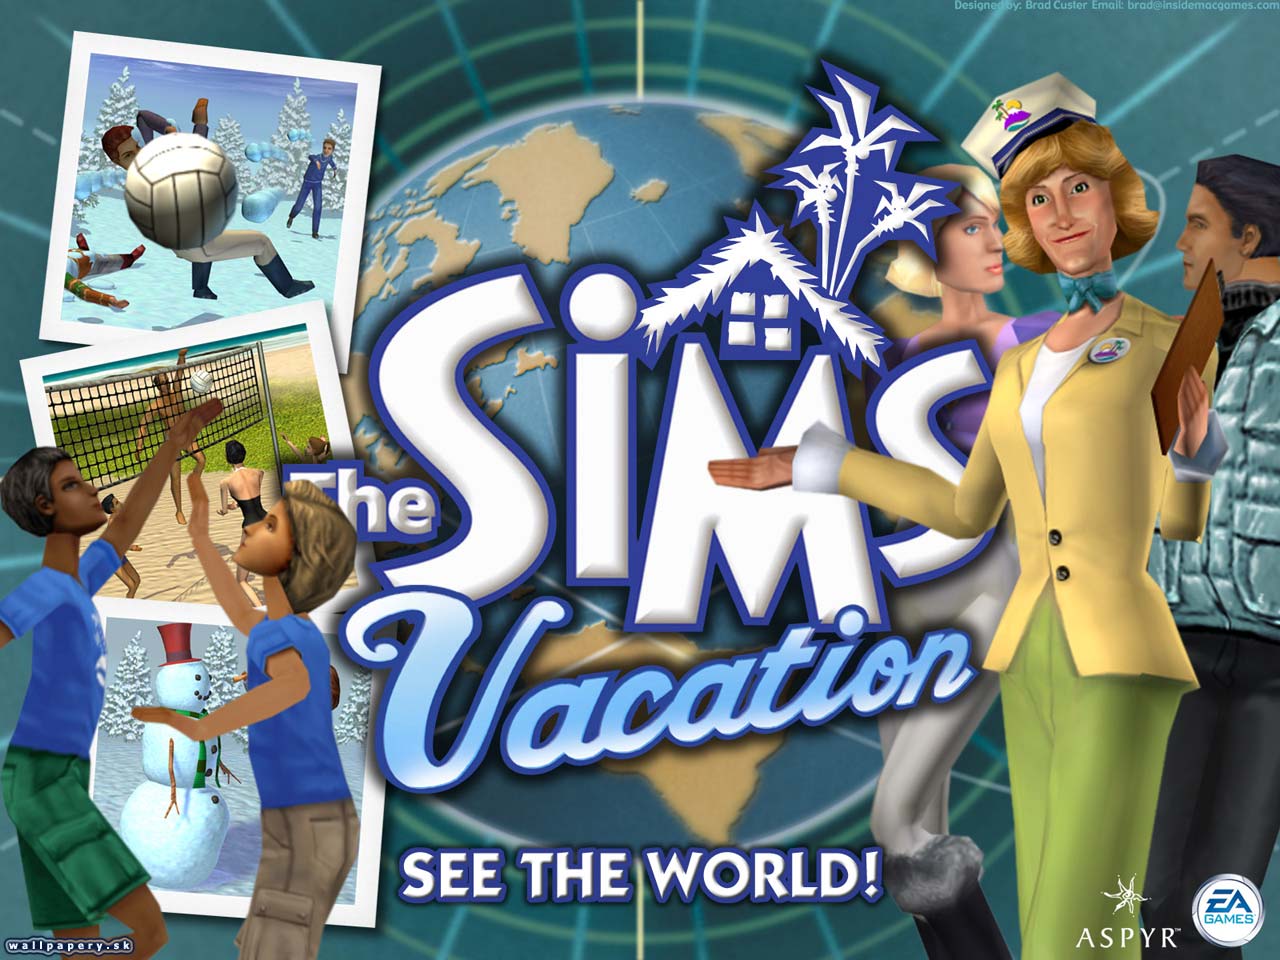 The Sims: Vacation - wallpaper 5